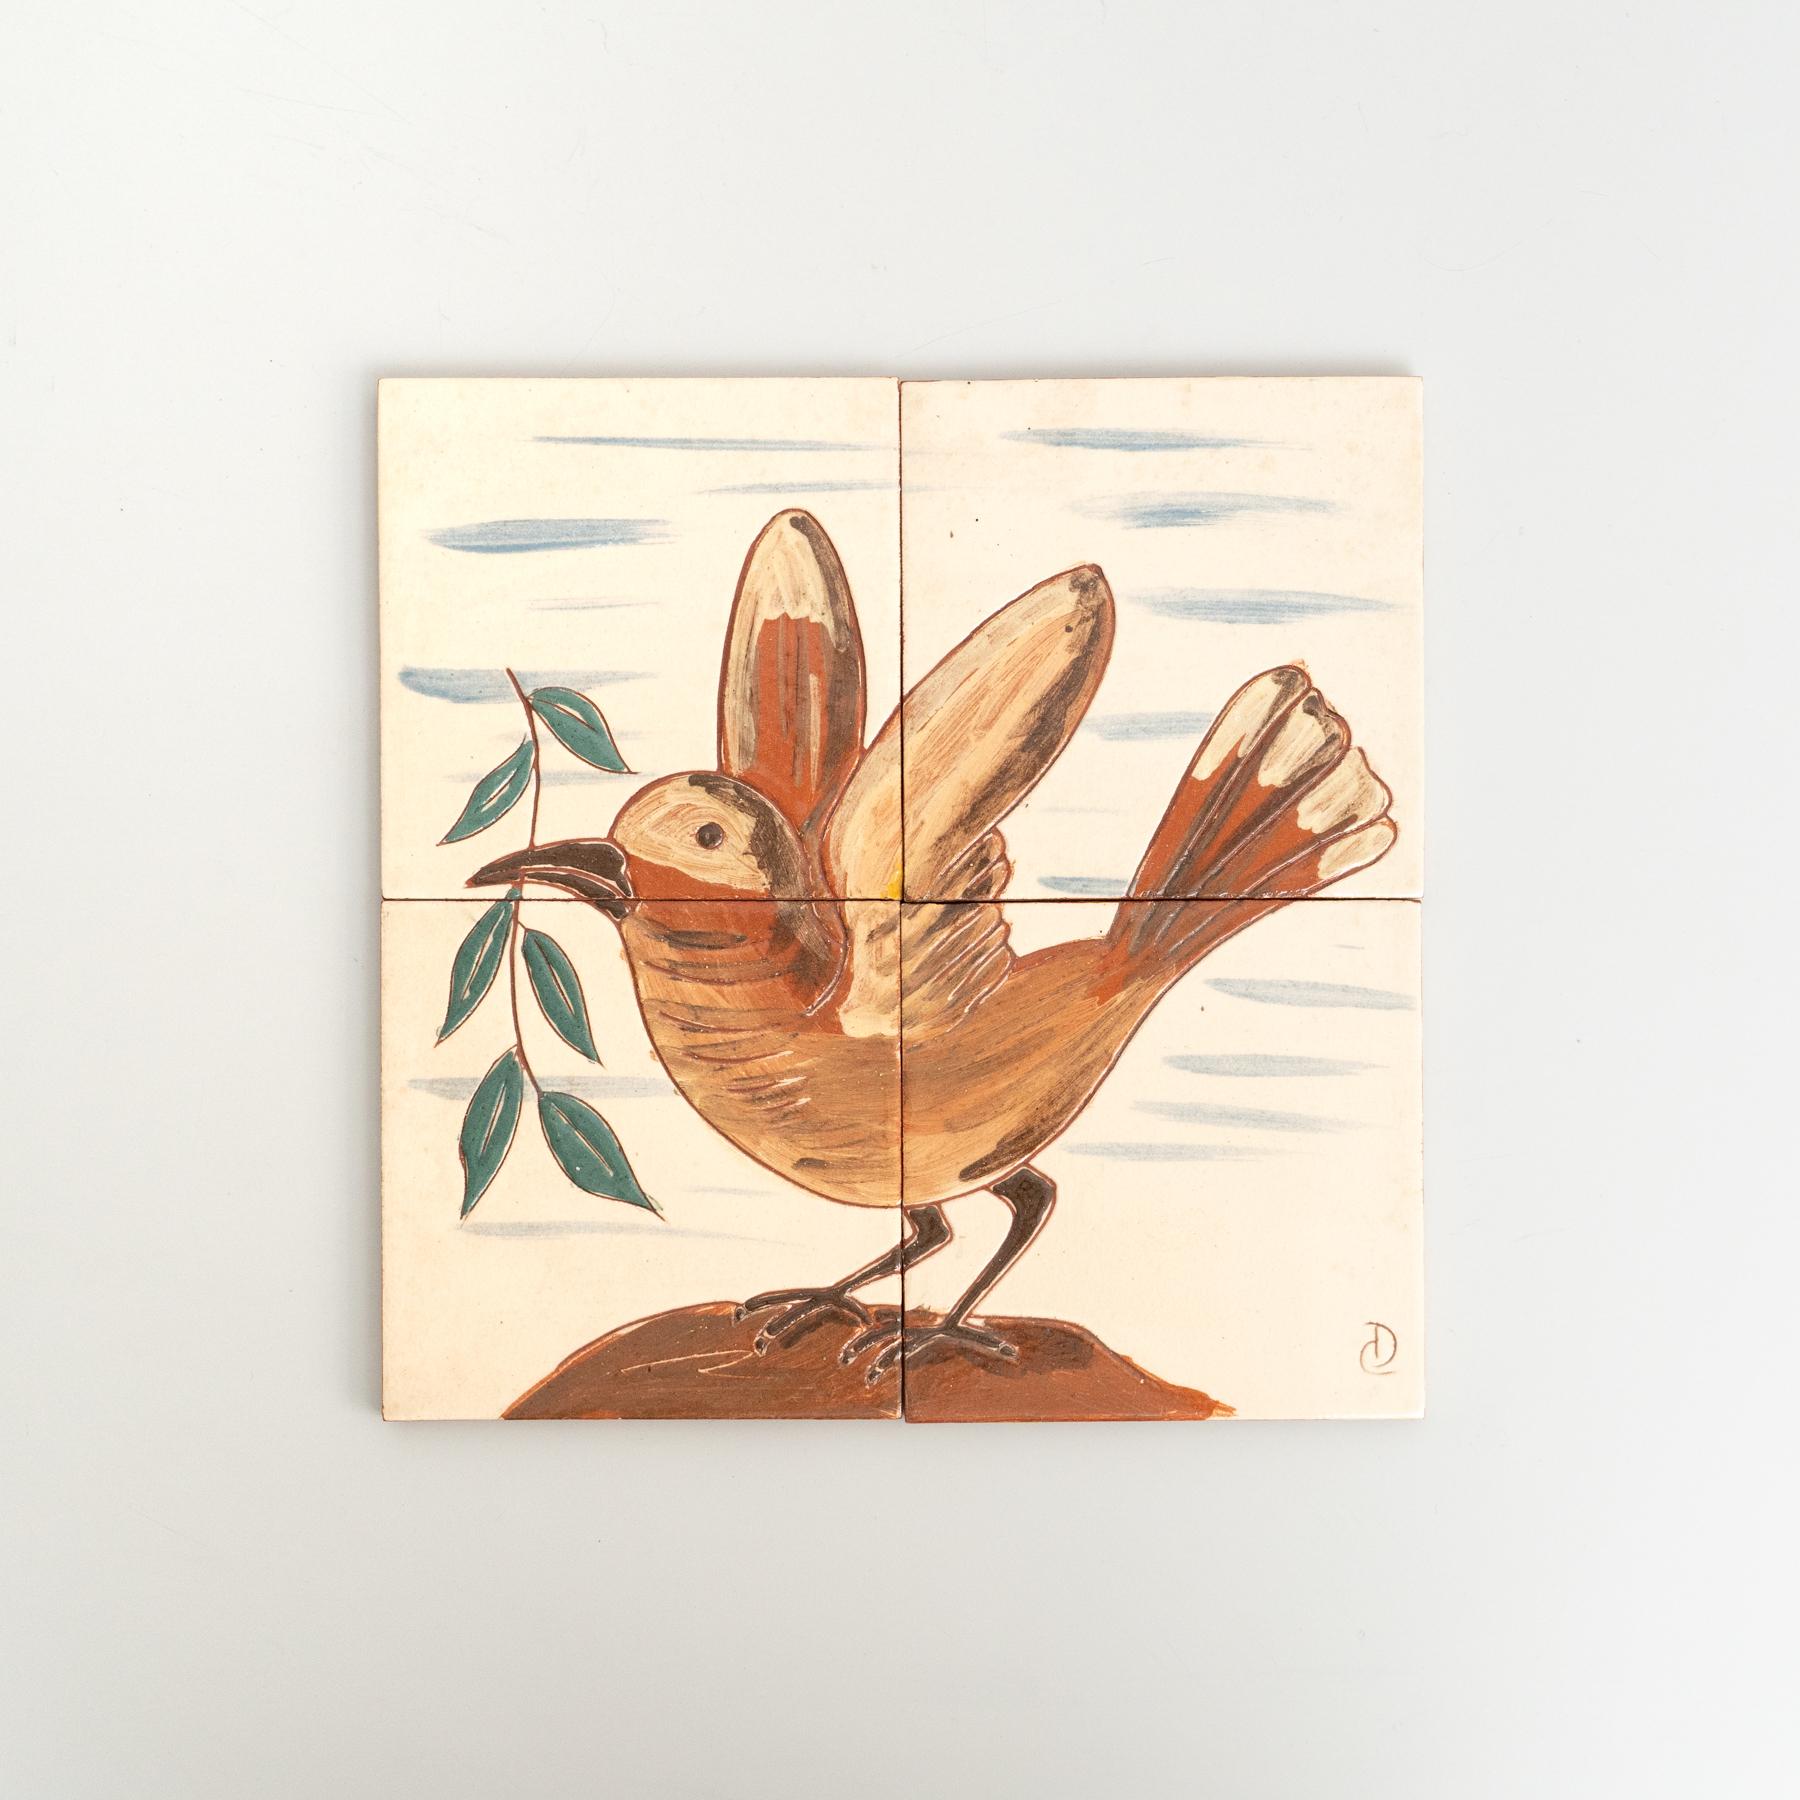 Ceramic hand painted artwork of bird by Catalan artist Diaz Costa, circa 1960.
Framed. Signed.

In original condition, with minor wear consistent of age and use, preserving a beautiul patina.

Tiles come separated, not attached.